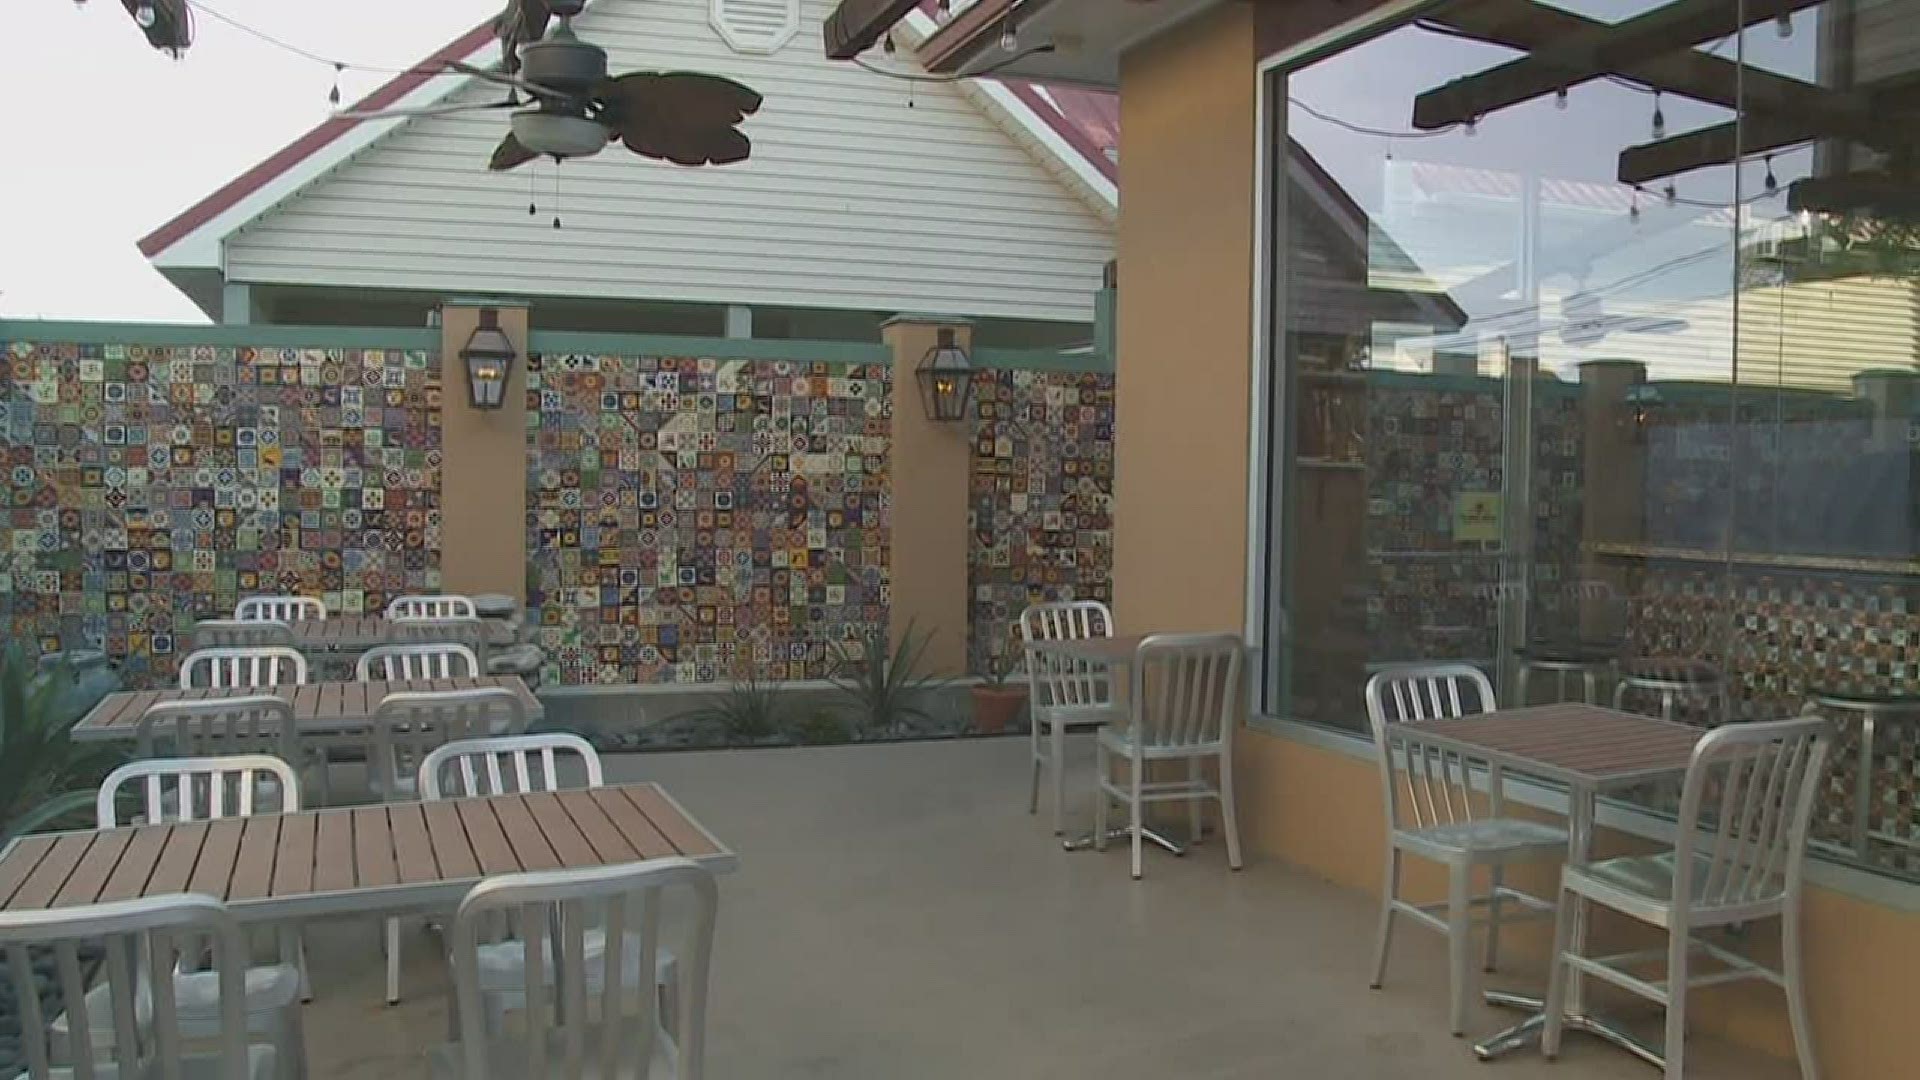 Restaurants prepare for outdoor seating amidst stay at home order